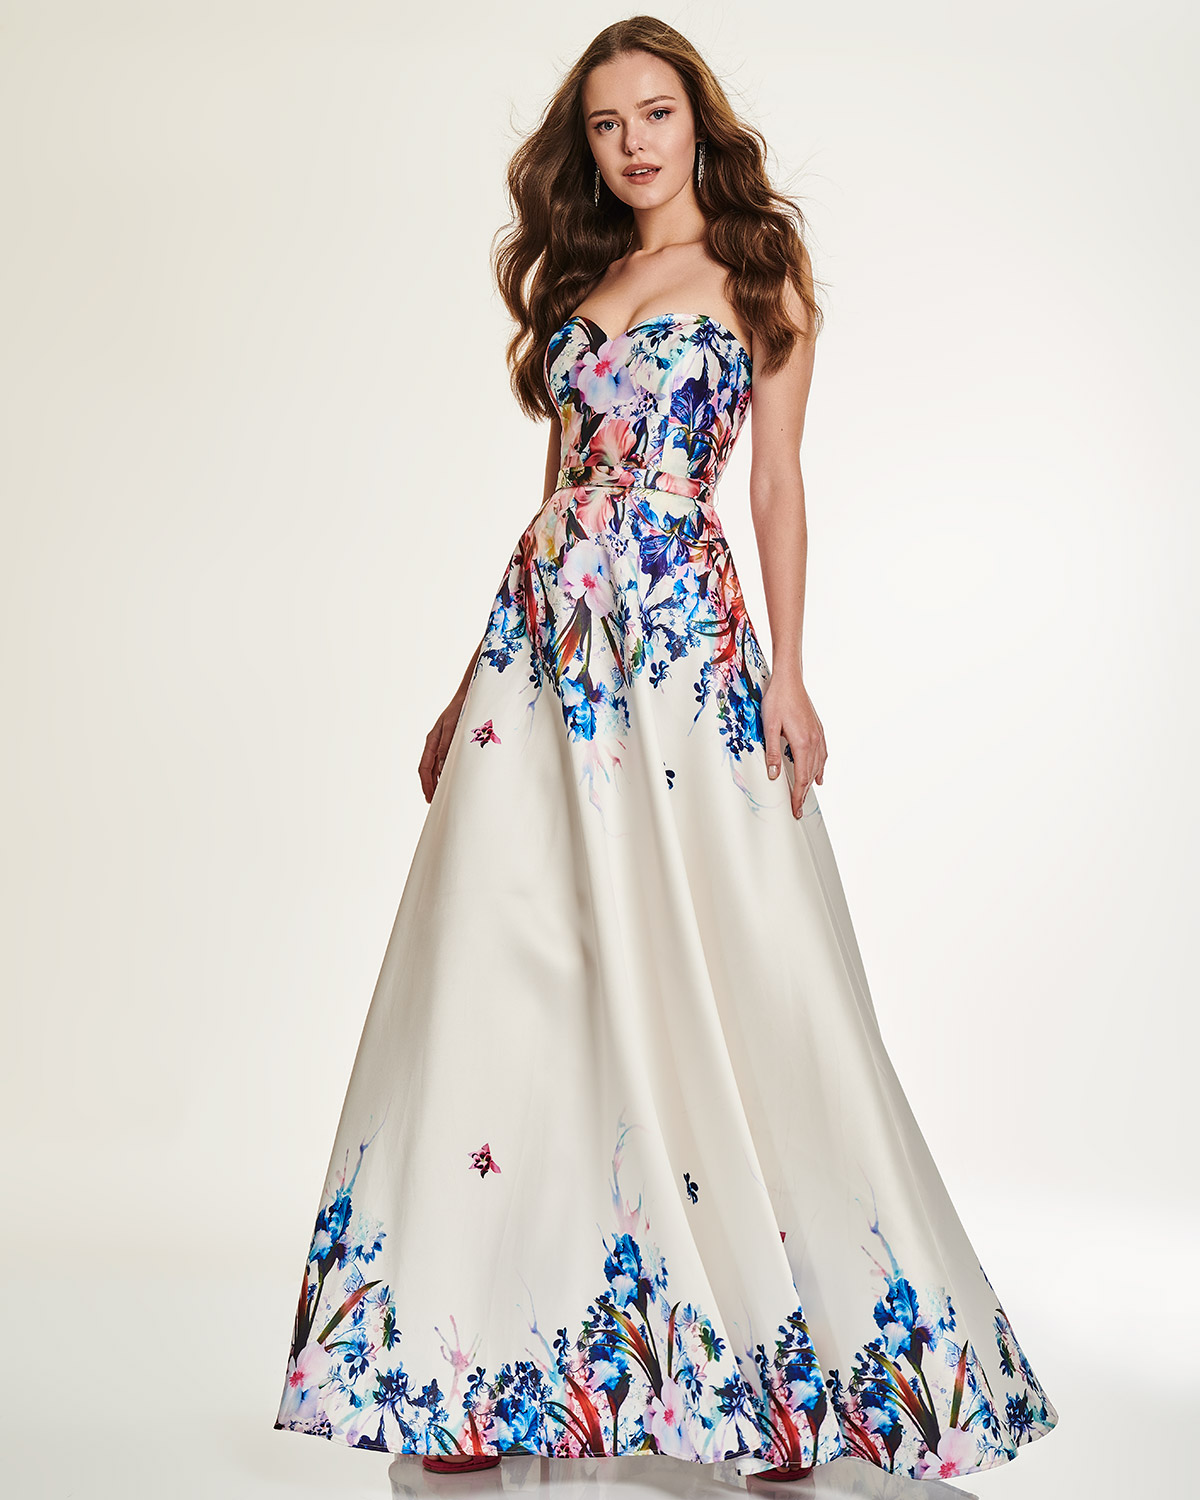 Cocktail Dresses / Cocktail long strapless dress with floral motif